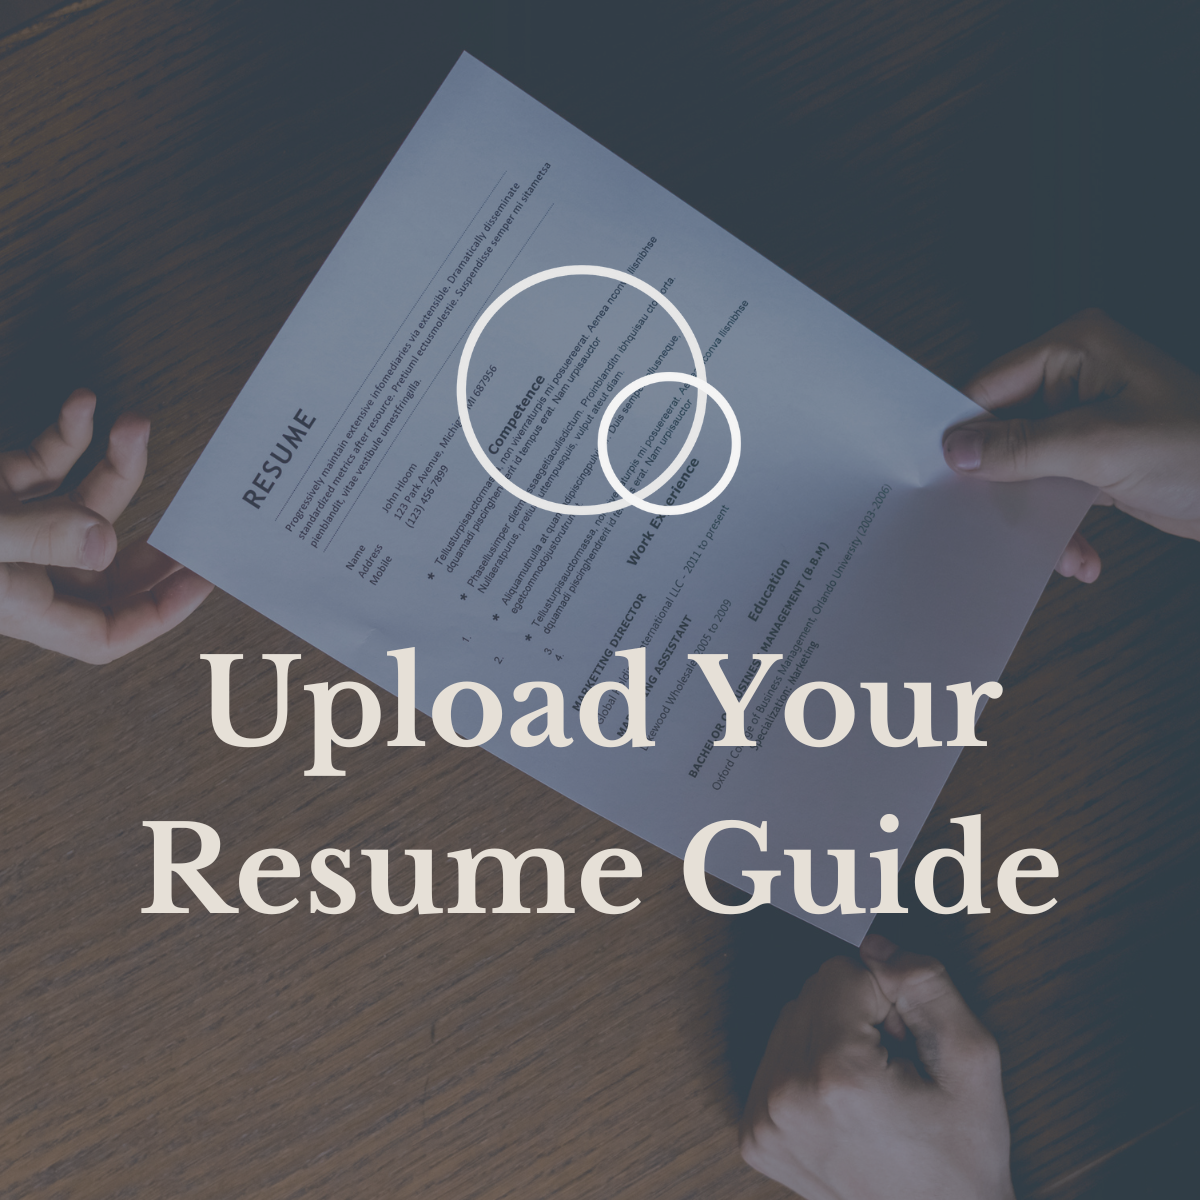 Upload Your Resume Guide